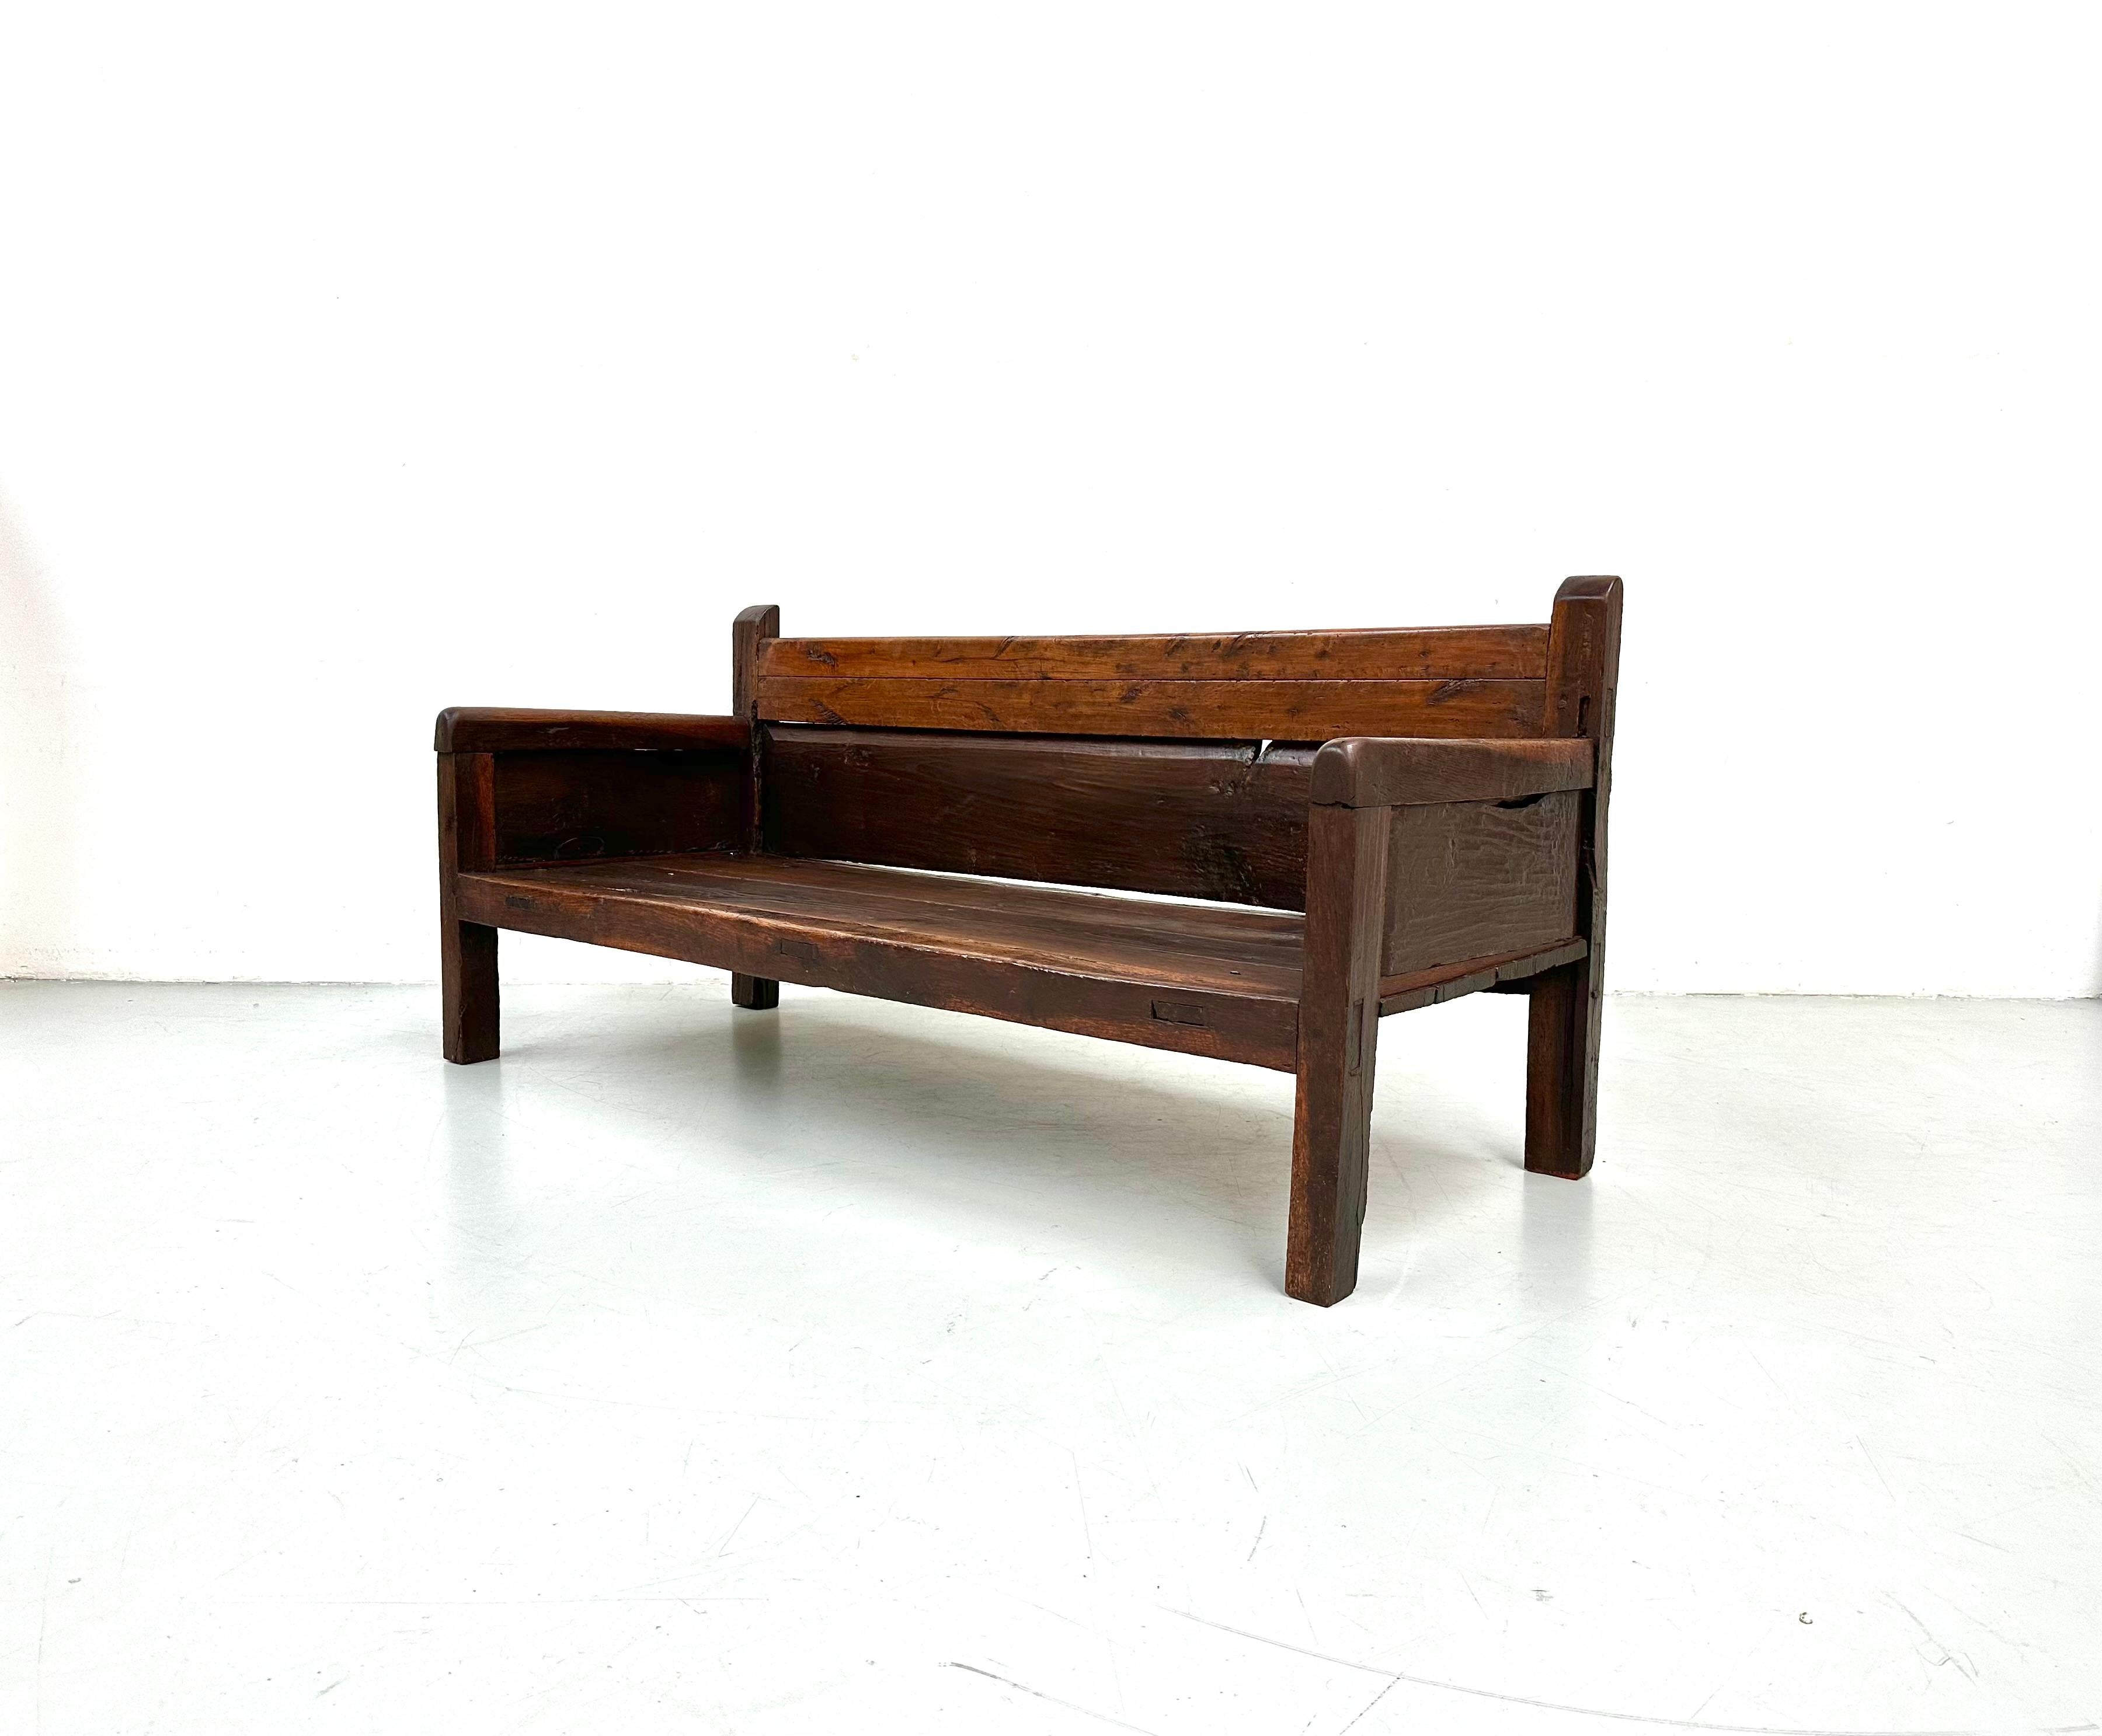 Antique Handmade Minimalistic Spanish Chestnut Wood Bench, Early 19th Century For Sale 15